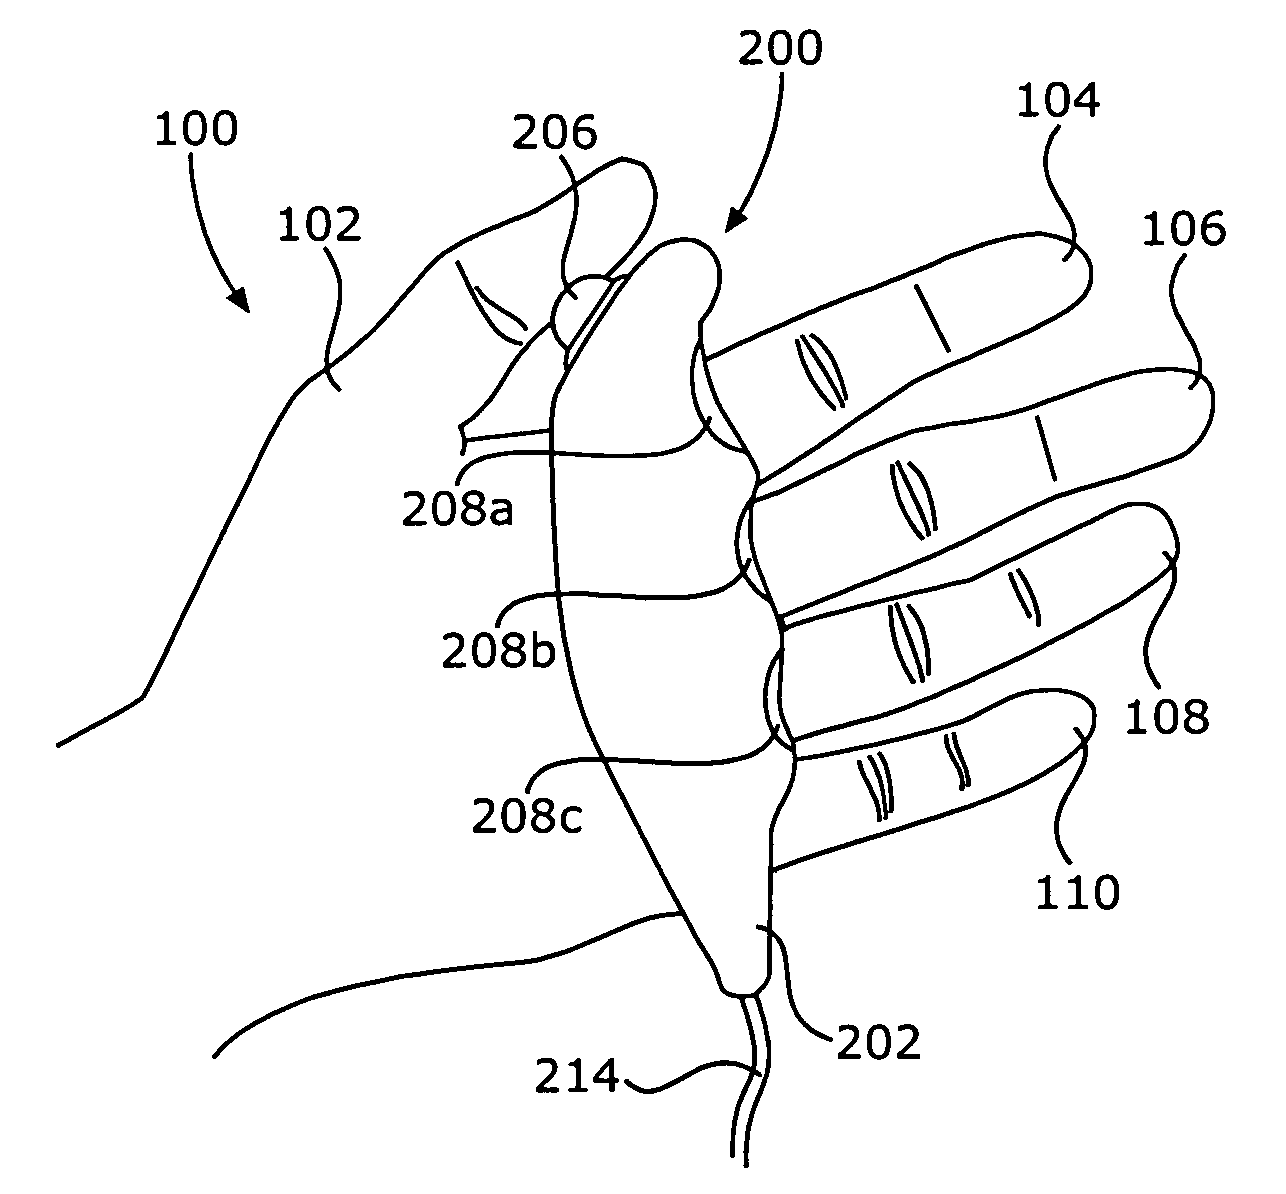 Hand-held computer control device